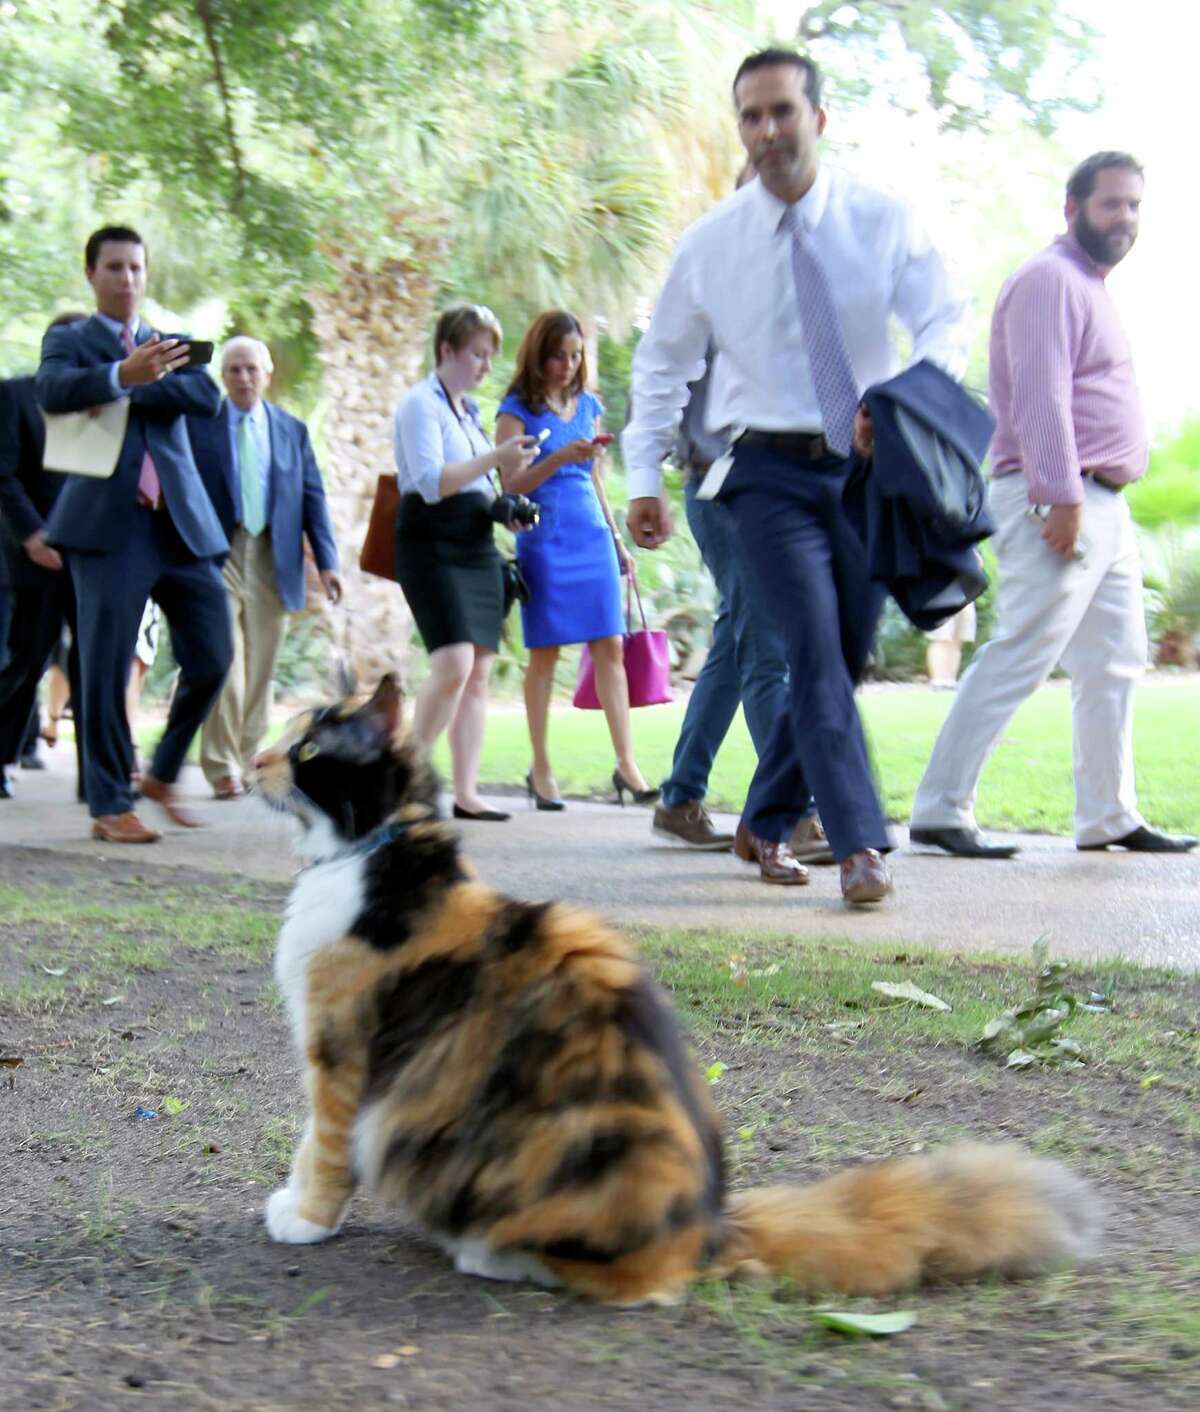 Texas Land Commissioner George P. Bush walks Wednesday toward Bella, the Alamo Cat, while on a tour of the Alamo grounds. Bush was in San Anotnio to celebrate the $31.5 million the General Land Office received to help preserve and develop the Alamo.